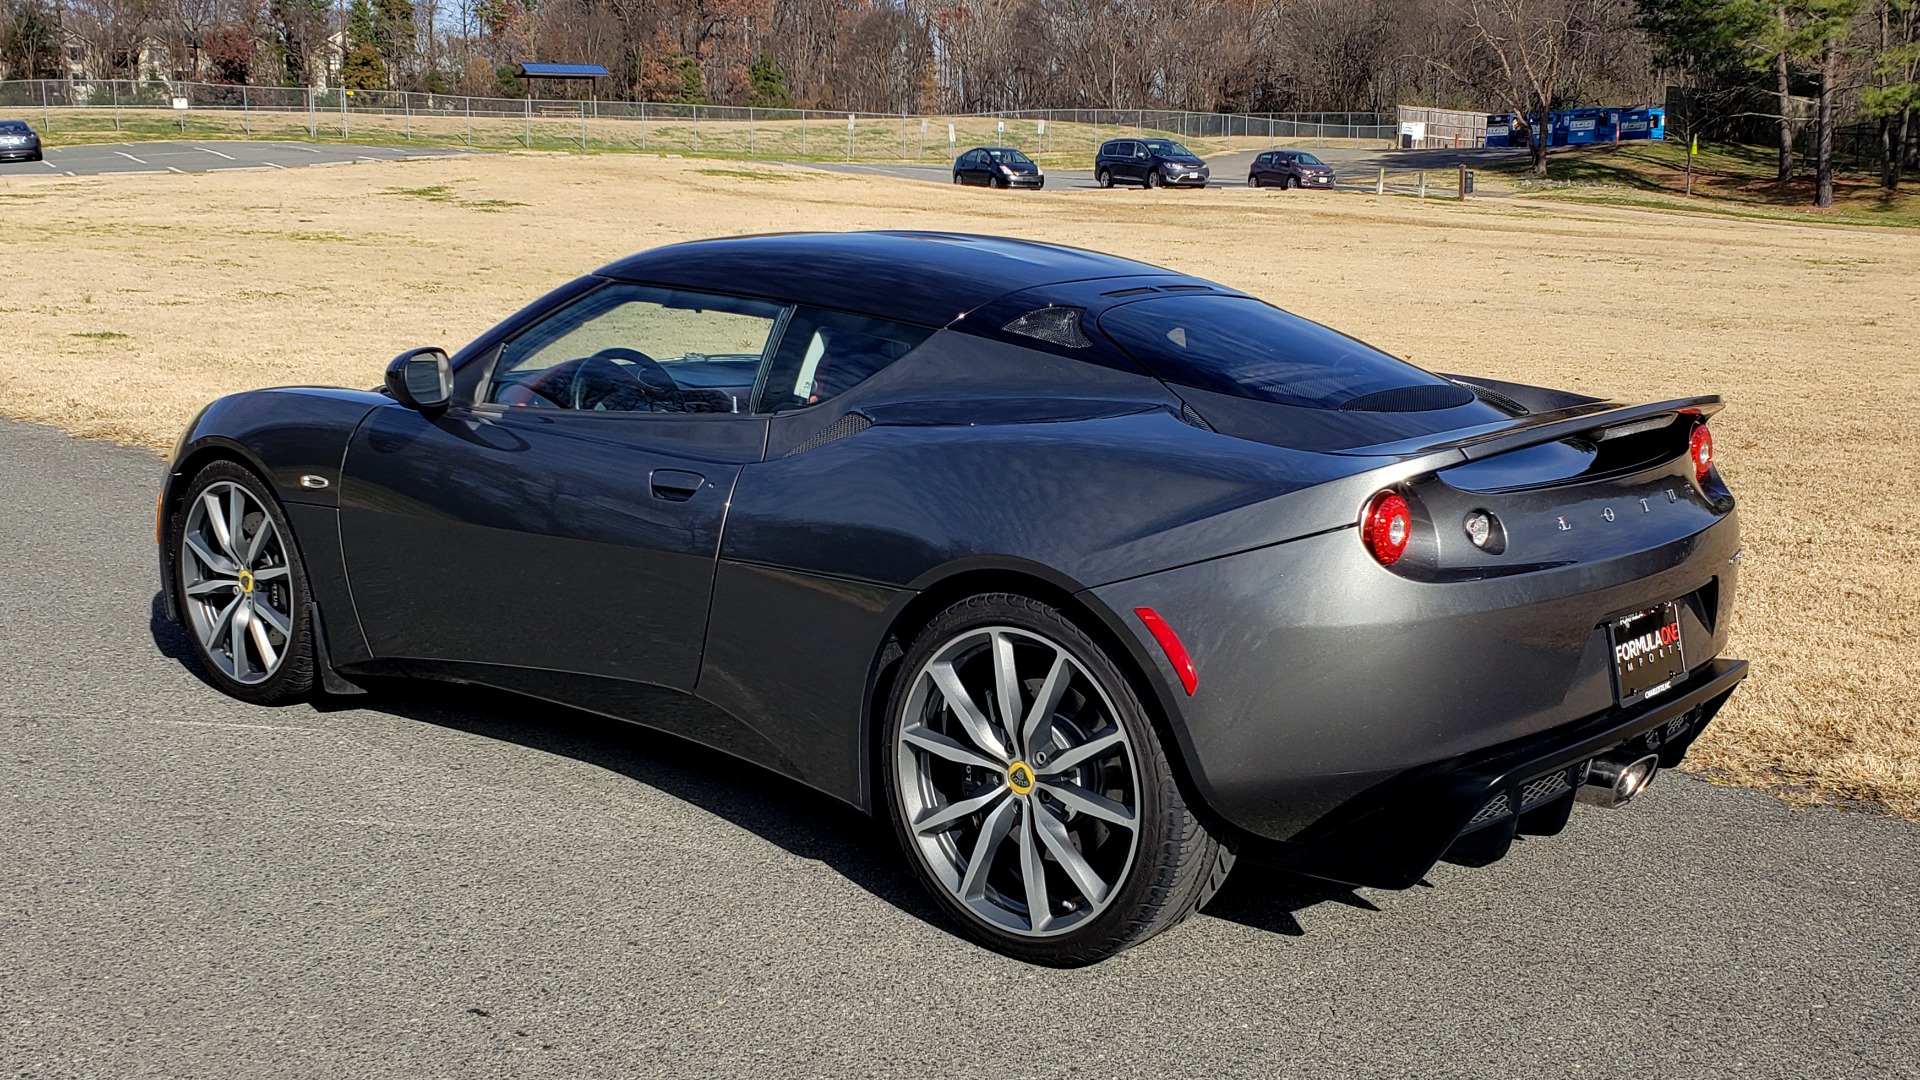 Used 2011 Lotus EVORA S 2+2 / 3.5L V6 / 6-SPD MANUAL / PIONEER / REARVIEW / LOW MILES for sale Sold at Formula Imports in Charlotte NC 28227 5